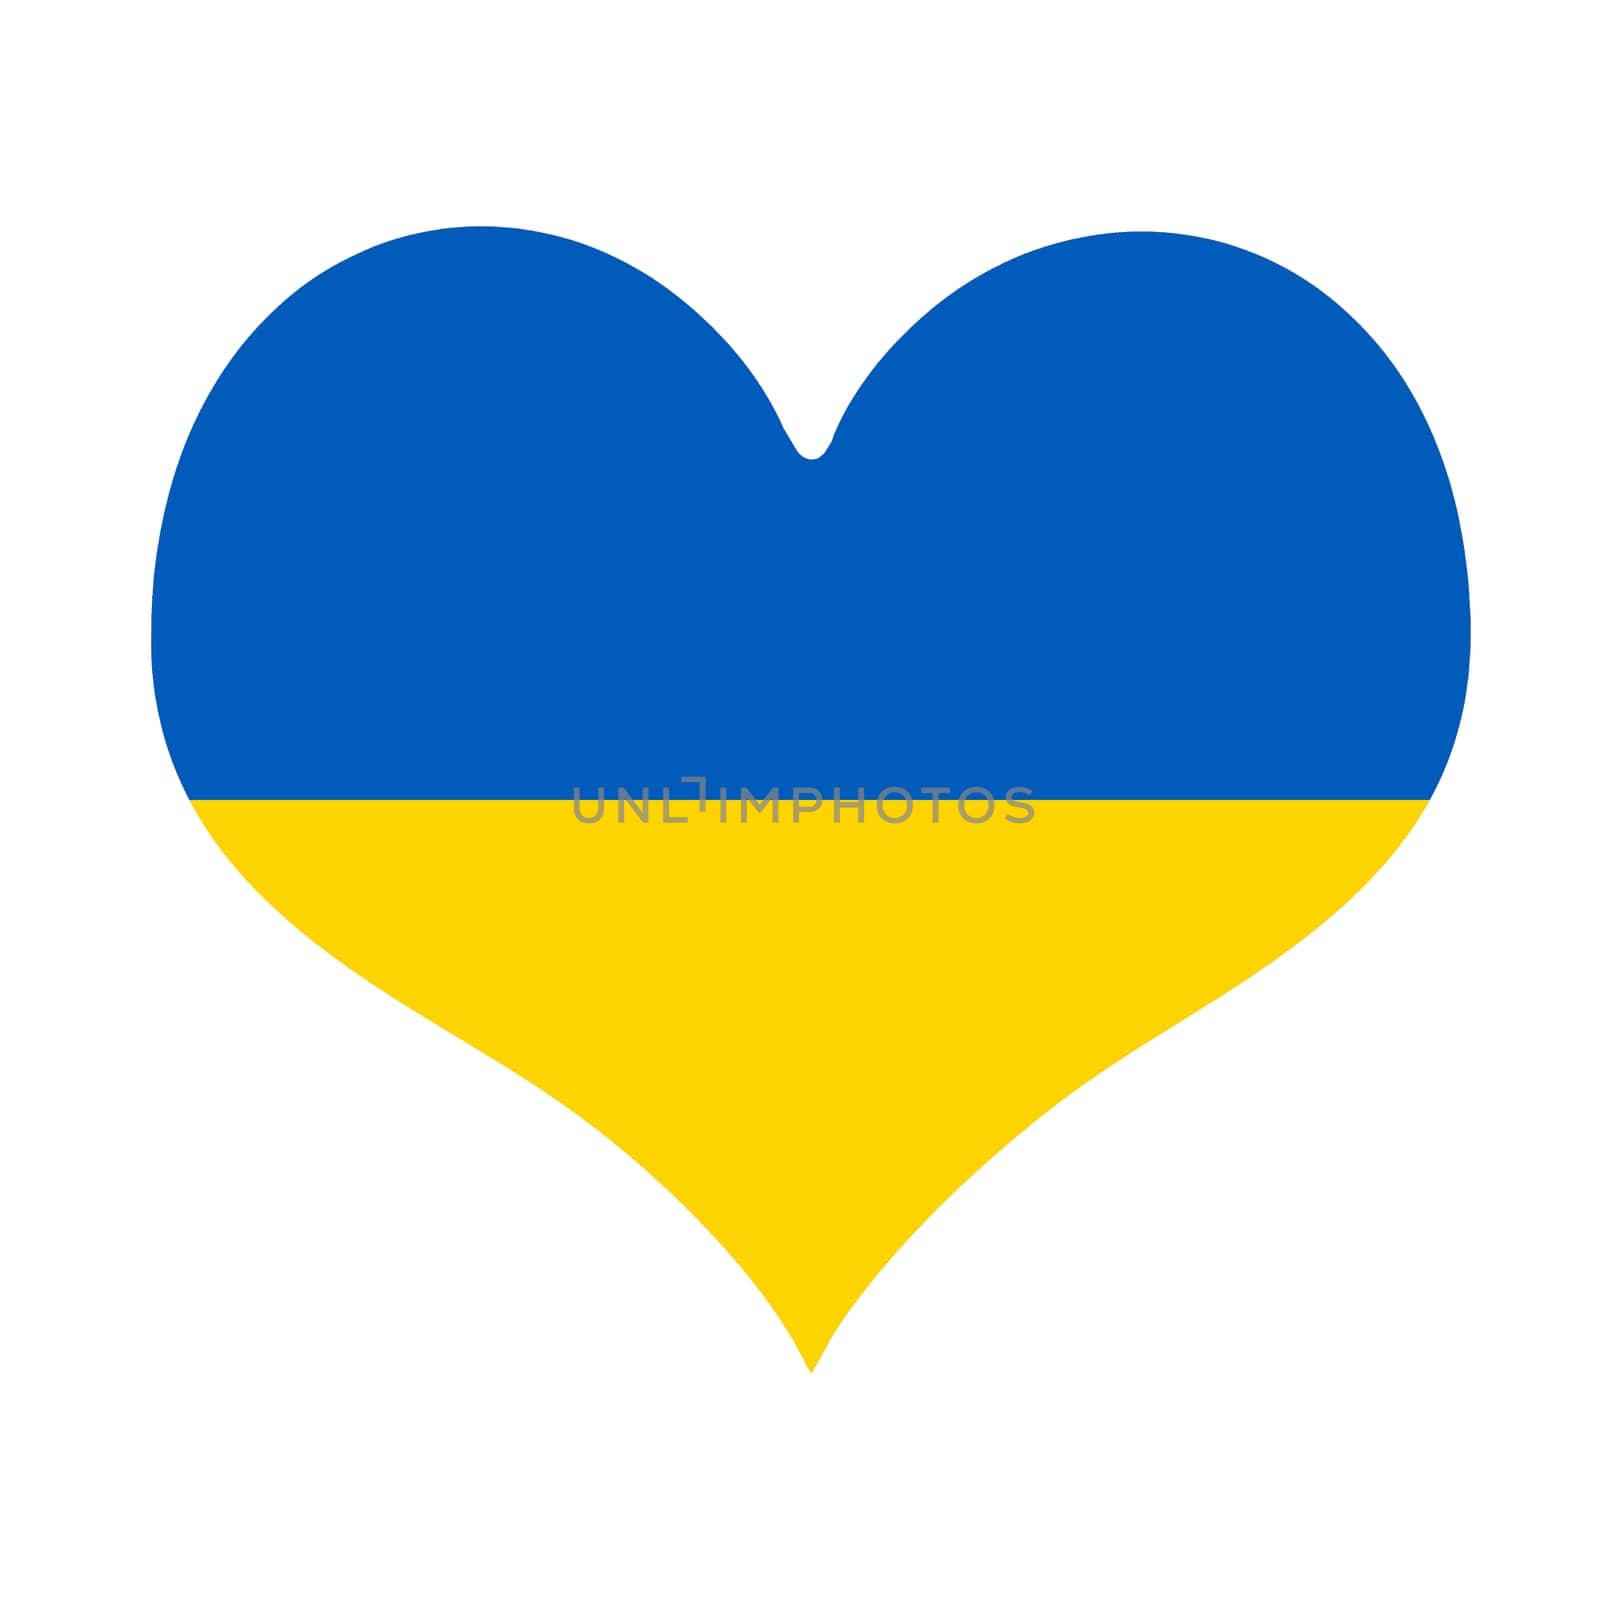 A love heart with the Ukraine flag inside it.